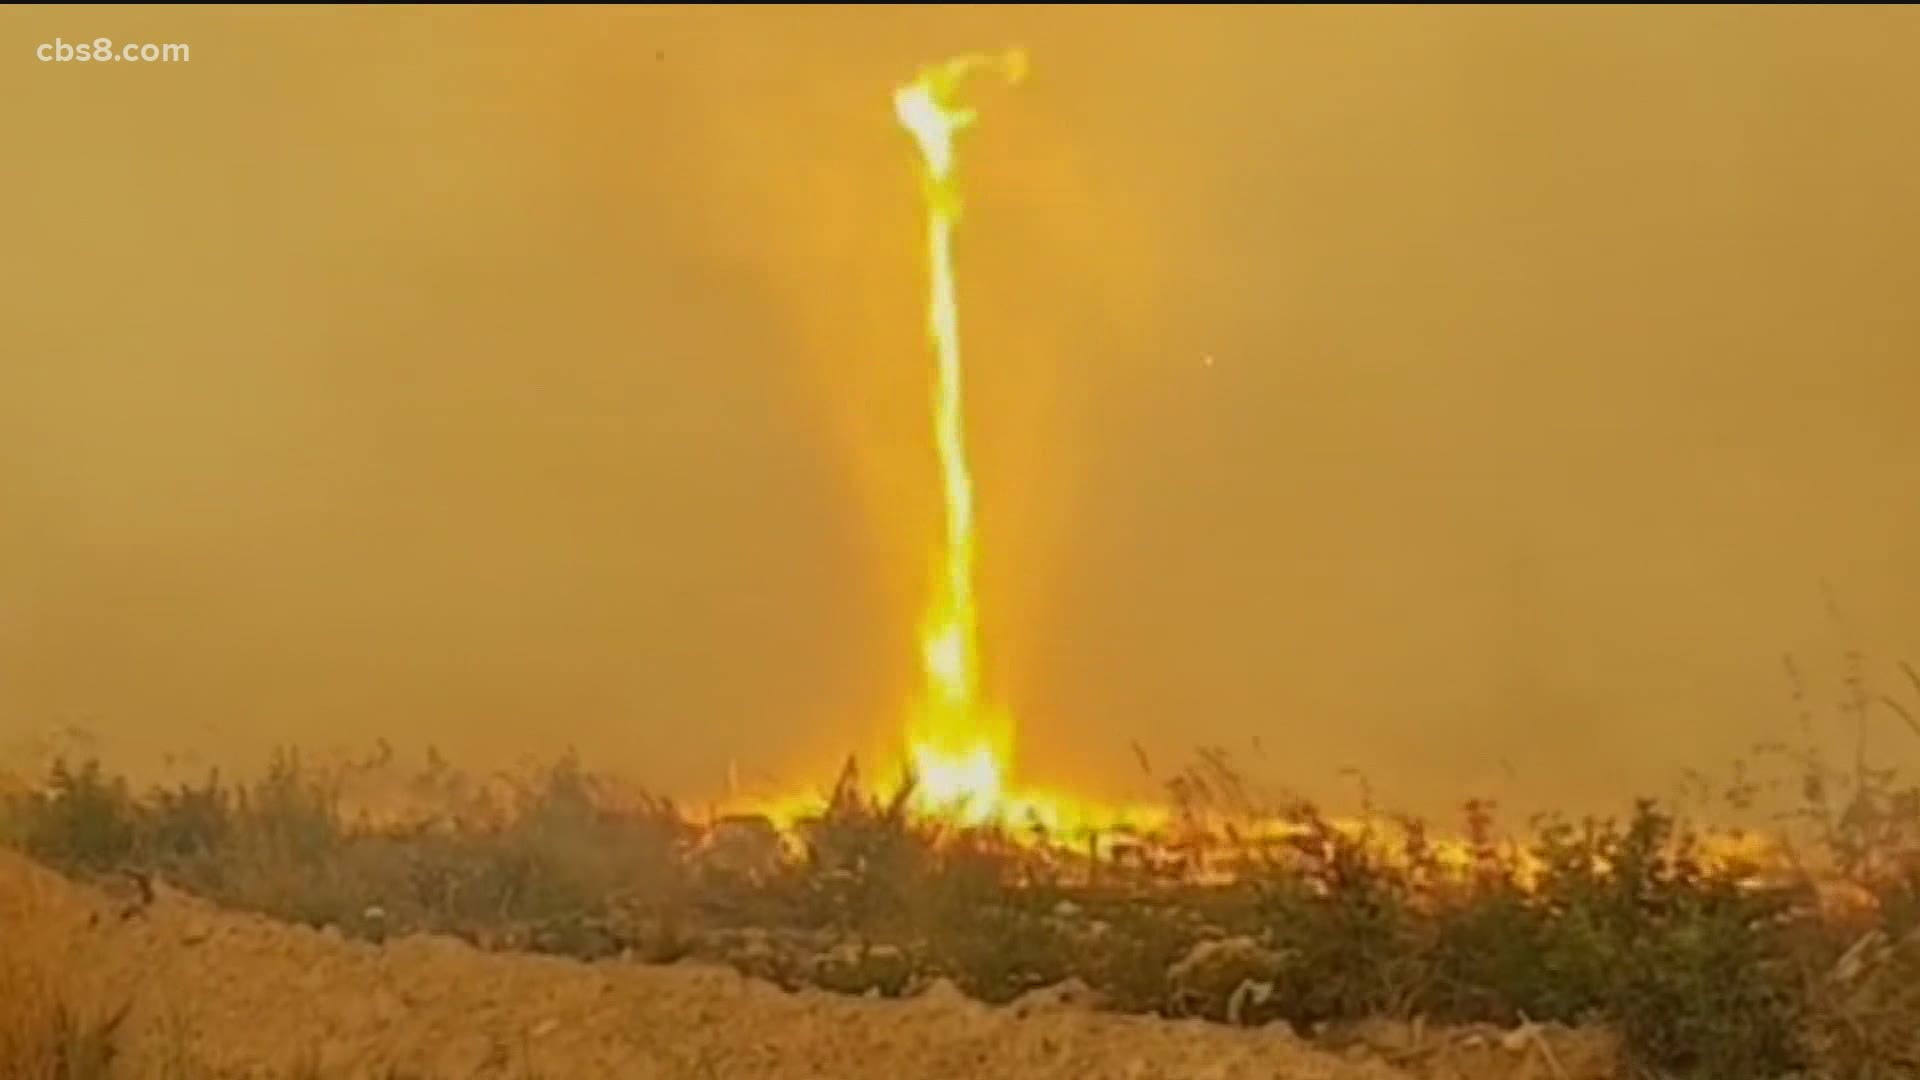 The "fire tornado" or "firenado" got spinning so fast it got up to 140 mph spinning in the Carr Fire near Redding in 2018.